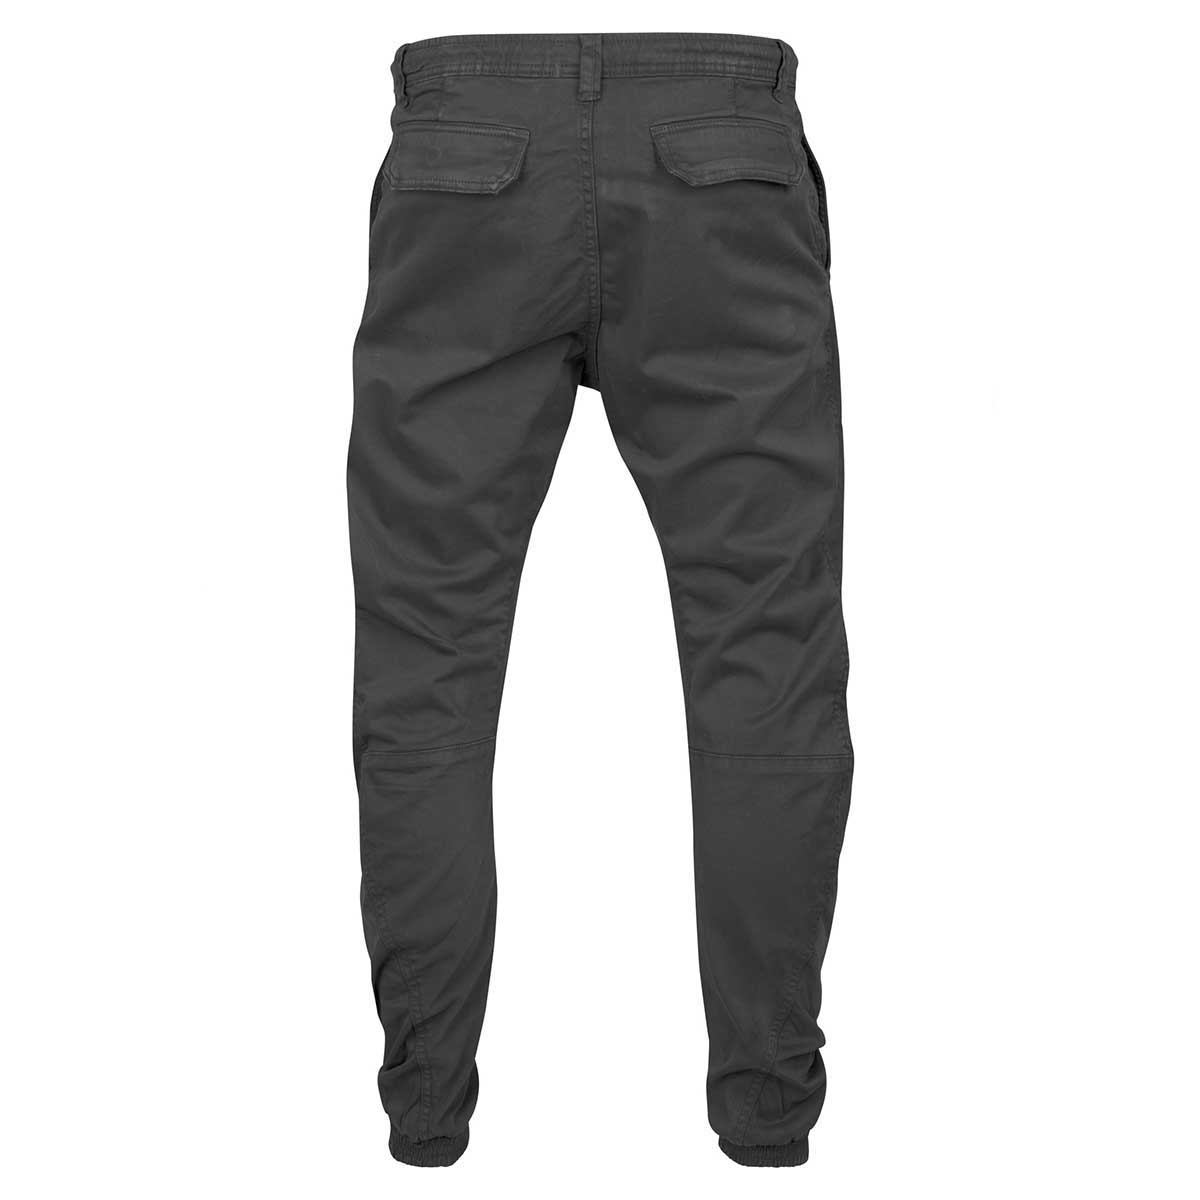 RIDERS GONNA RIDE® Stretch Pants